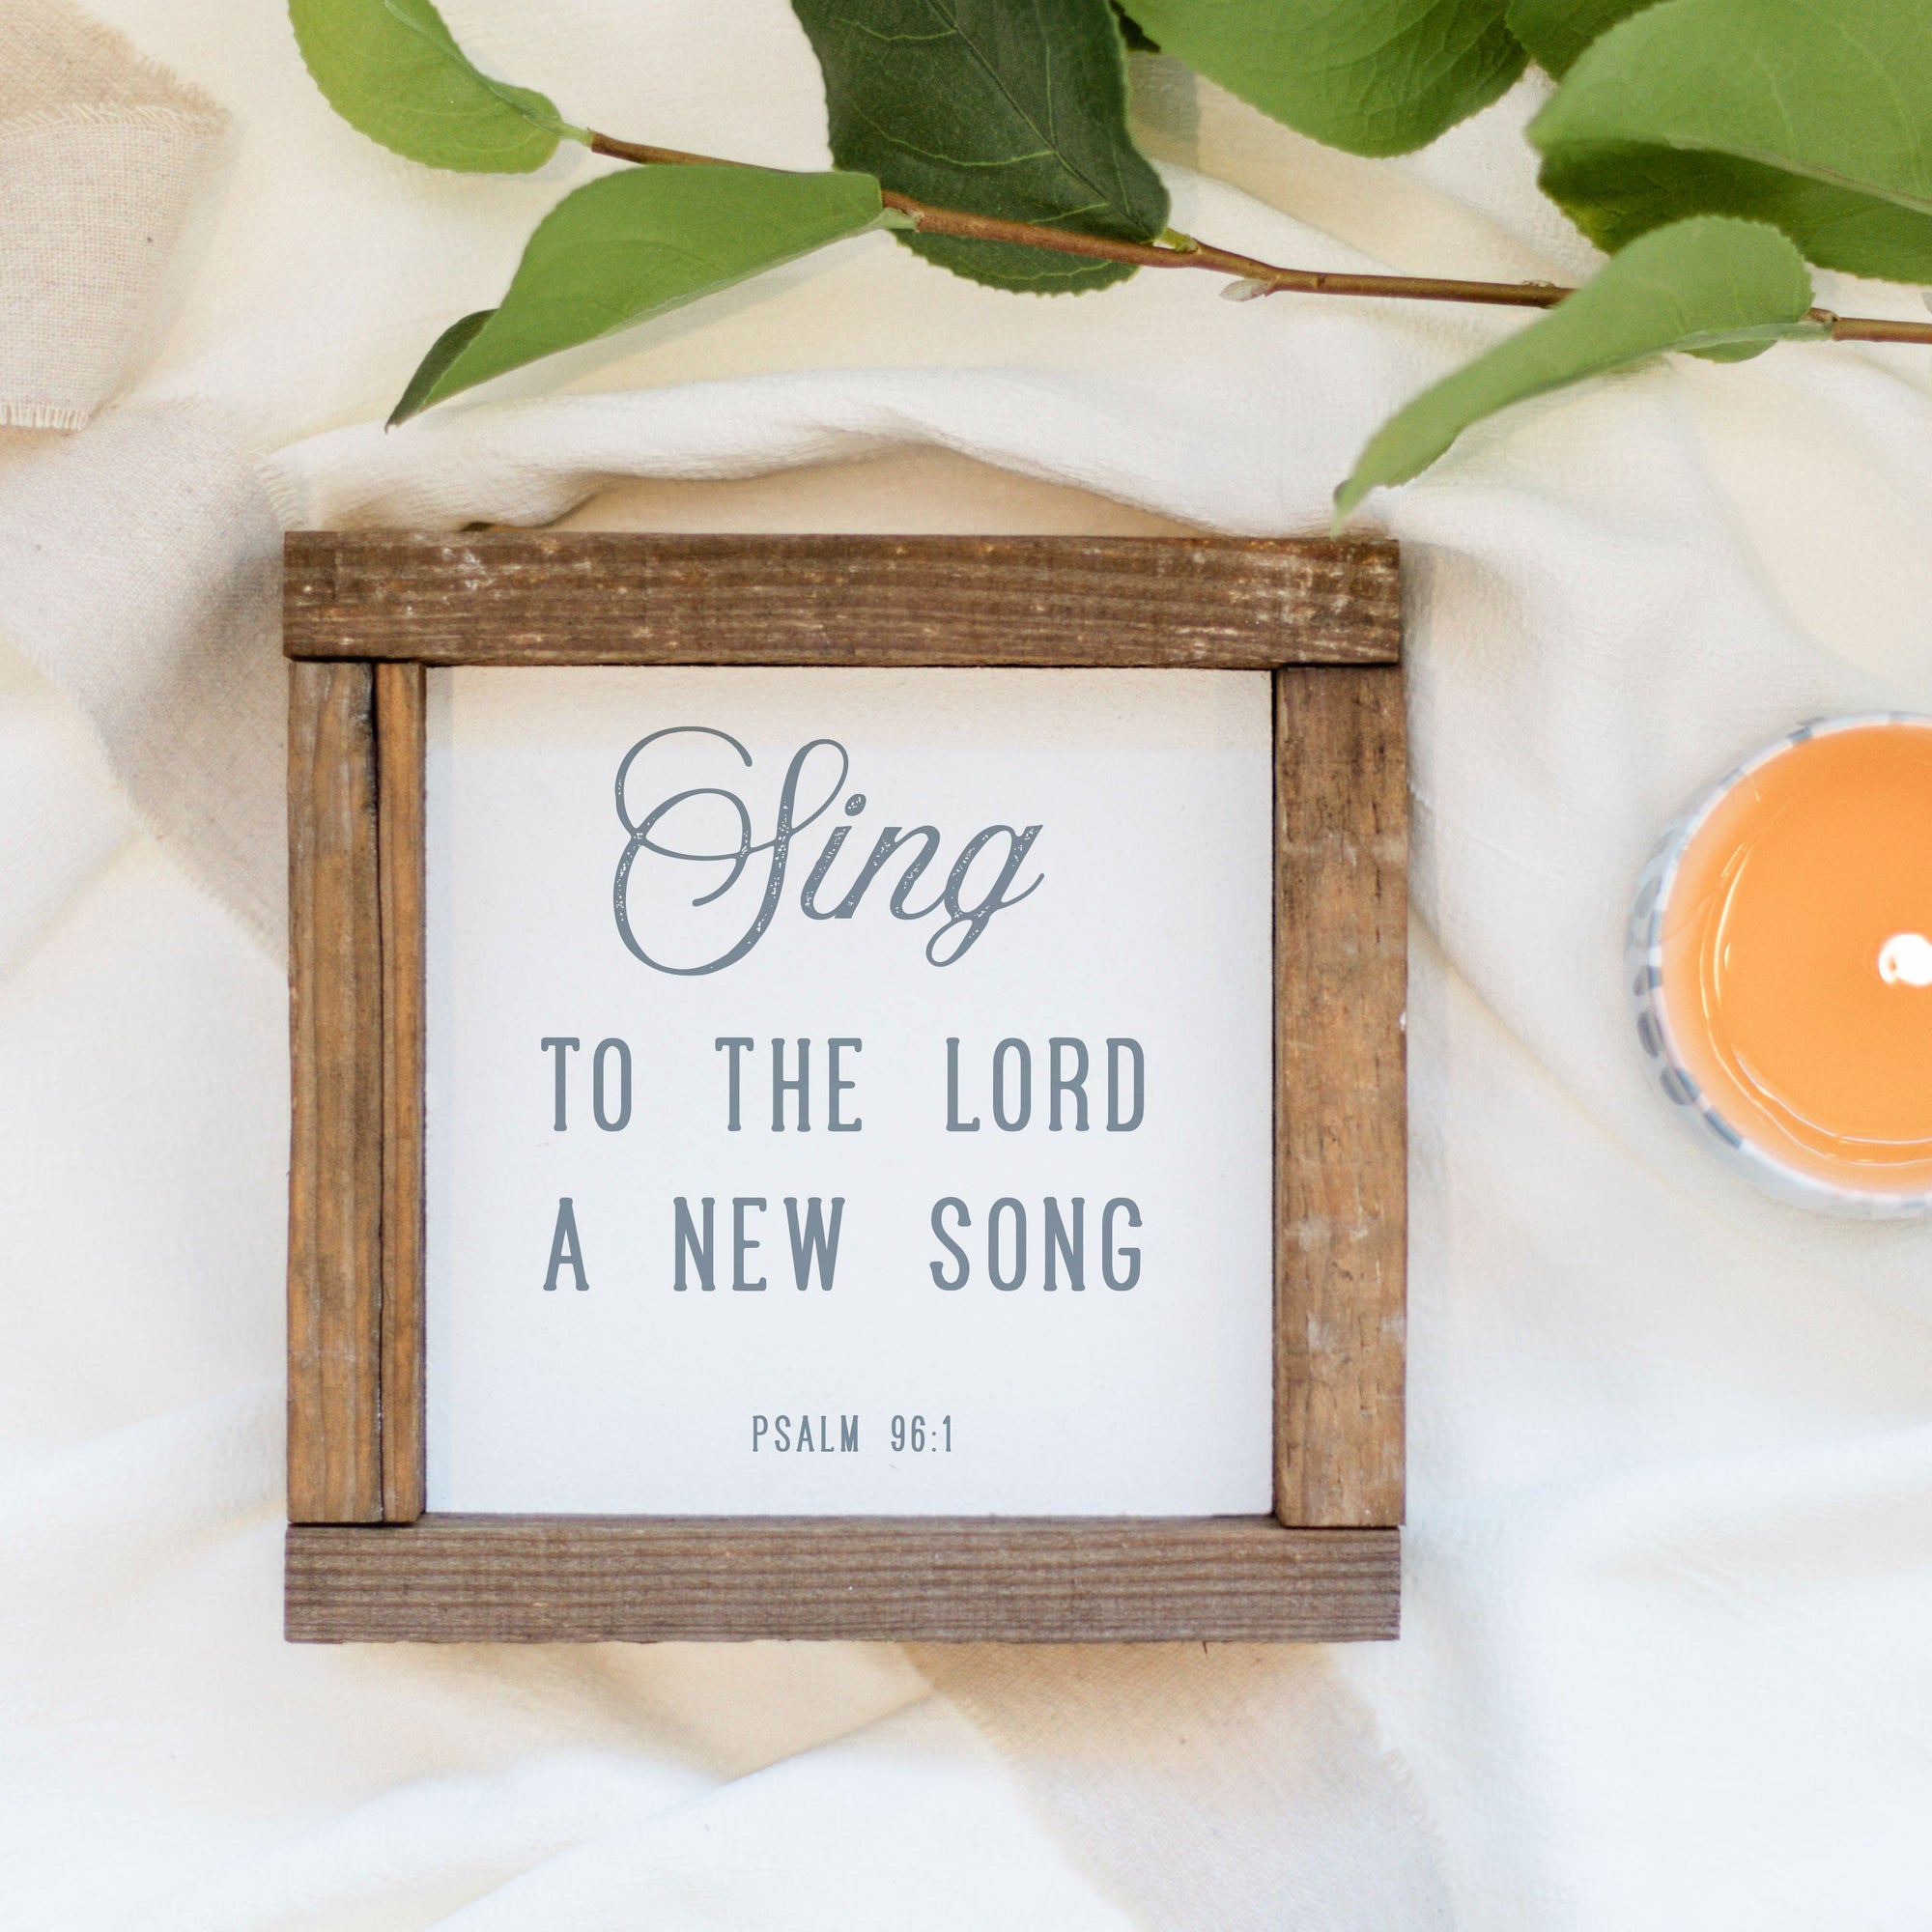 Front View. Scripture Sign | Sing To The Lord | Faith Based | Small Sign Decor The WAREHOUSE Studio 